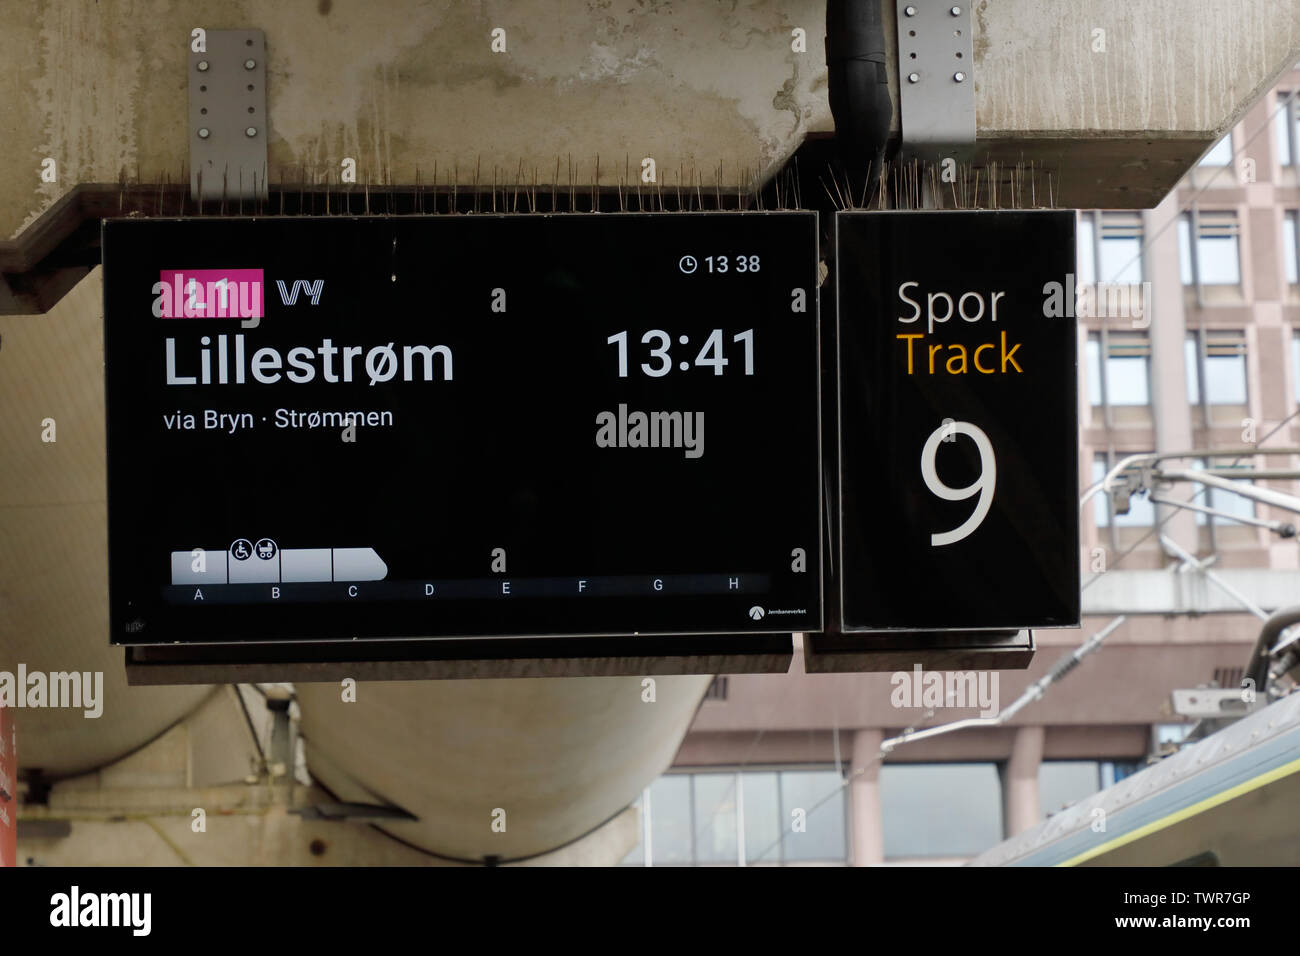 Oslo, Norway - June 20, 2019: Platform information sign for train on line L1 with destination Lillestrom at the Oslo Central station track 9 operated Stock Photo